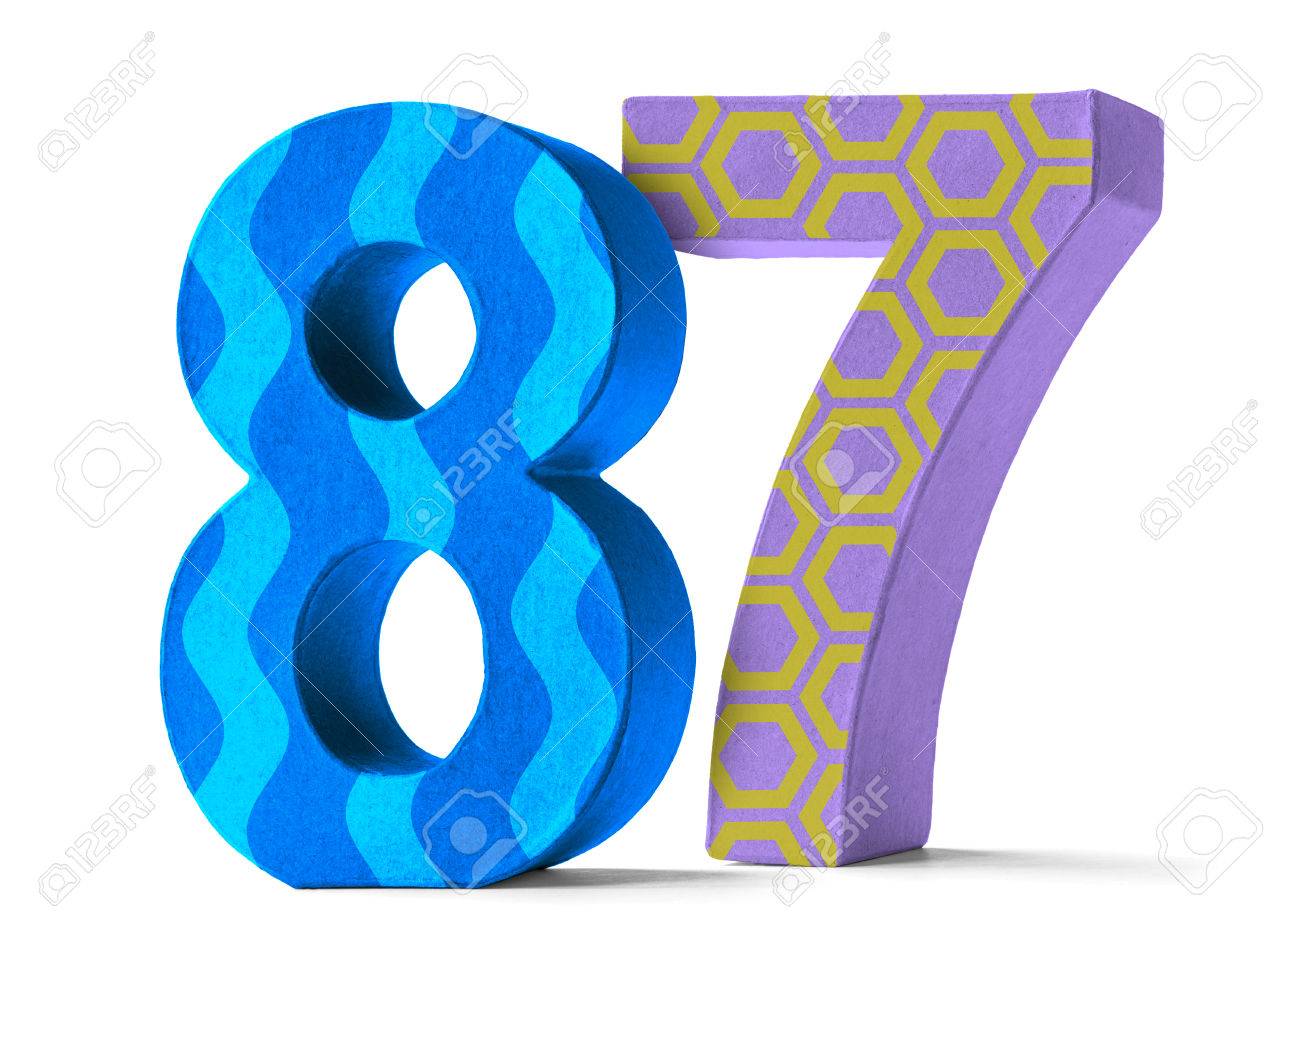 47062842-colorful-paper-mache-number-on-a-white-background-number-87.jpg